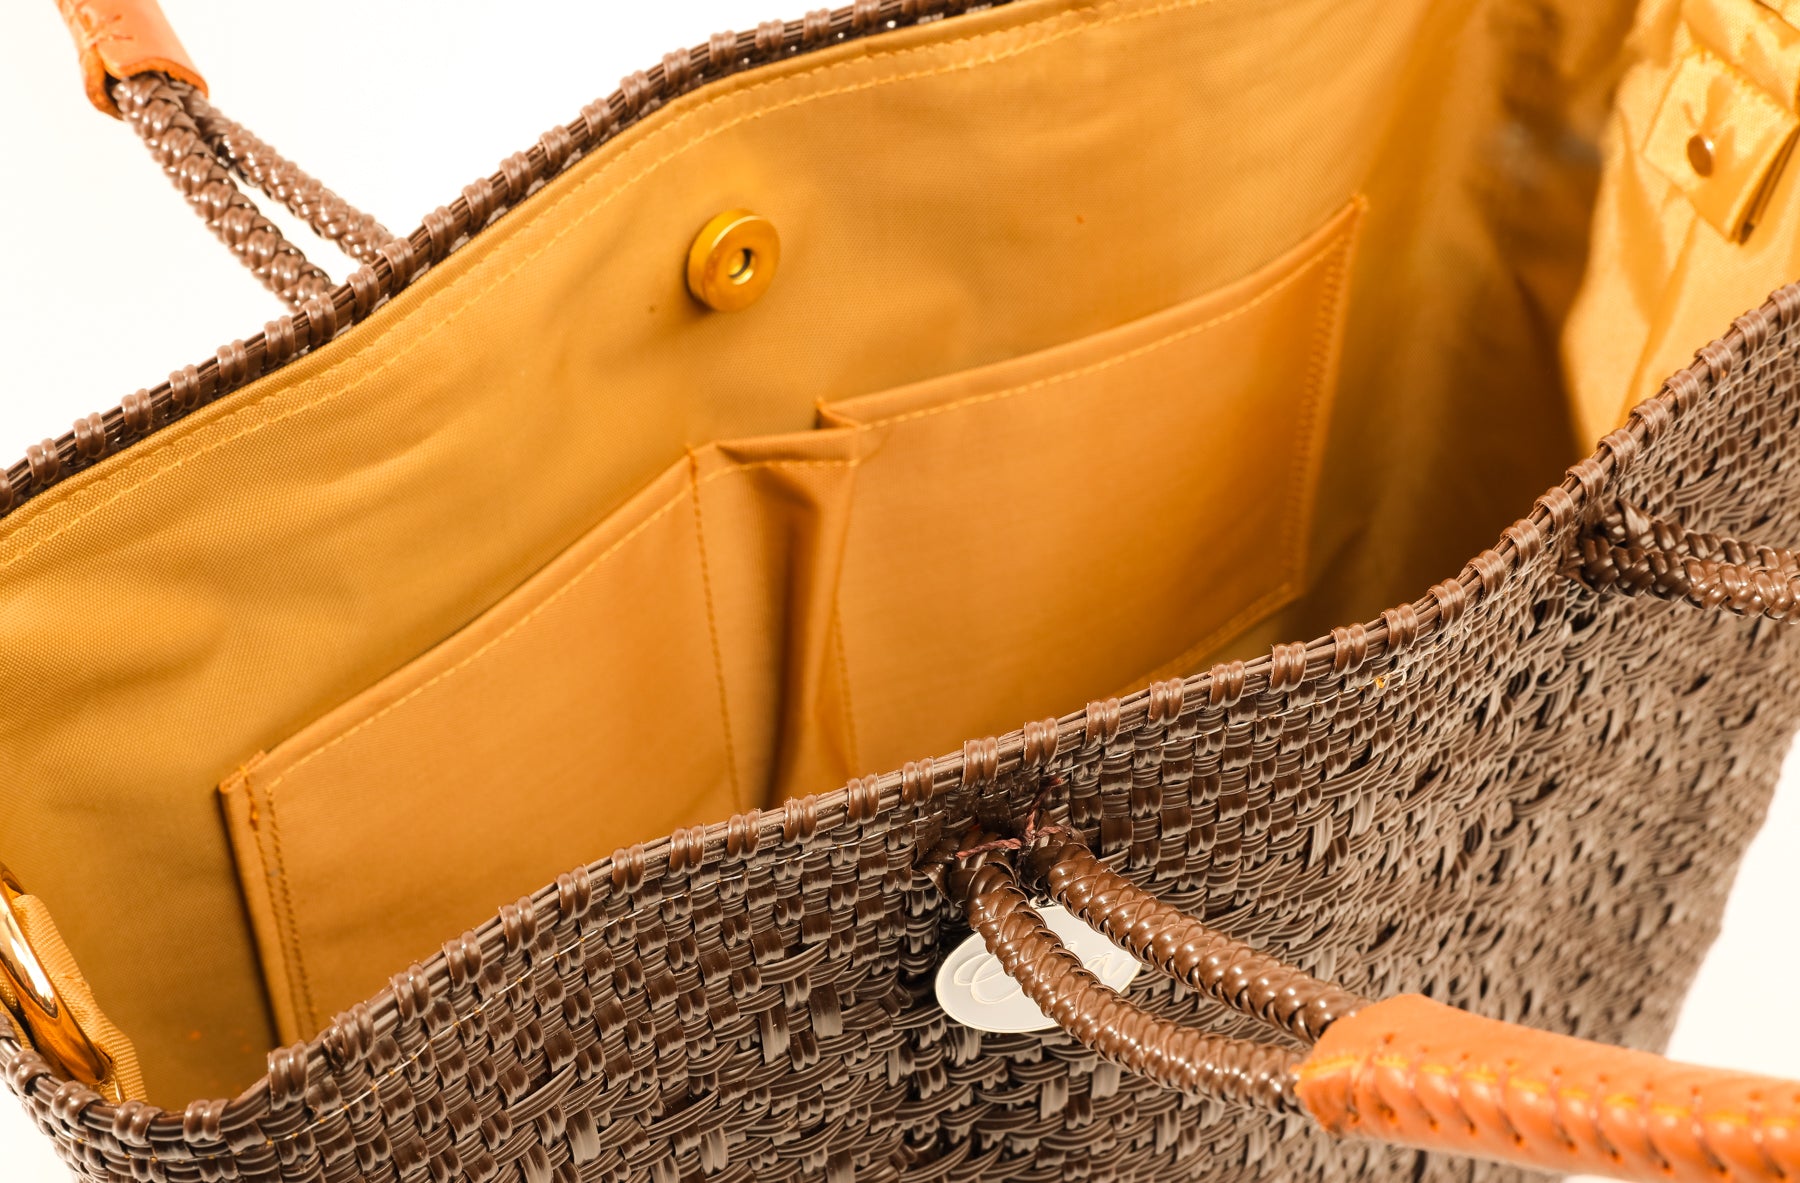 Inside tan lining with two pockets and magnetic closure of brown and tan woven handbag made from recycled plastics